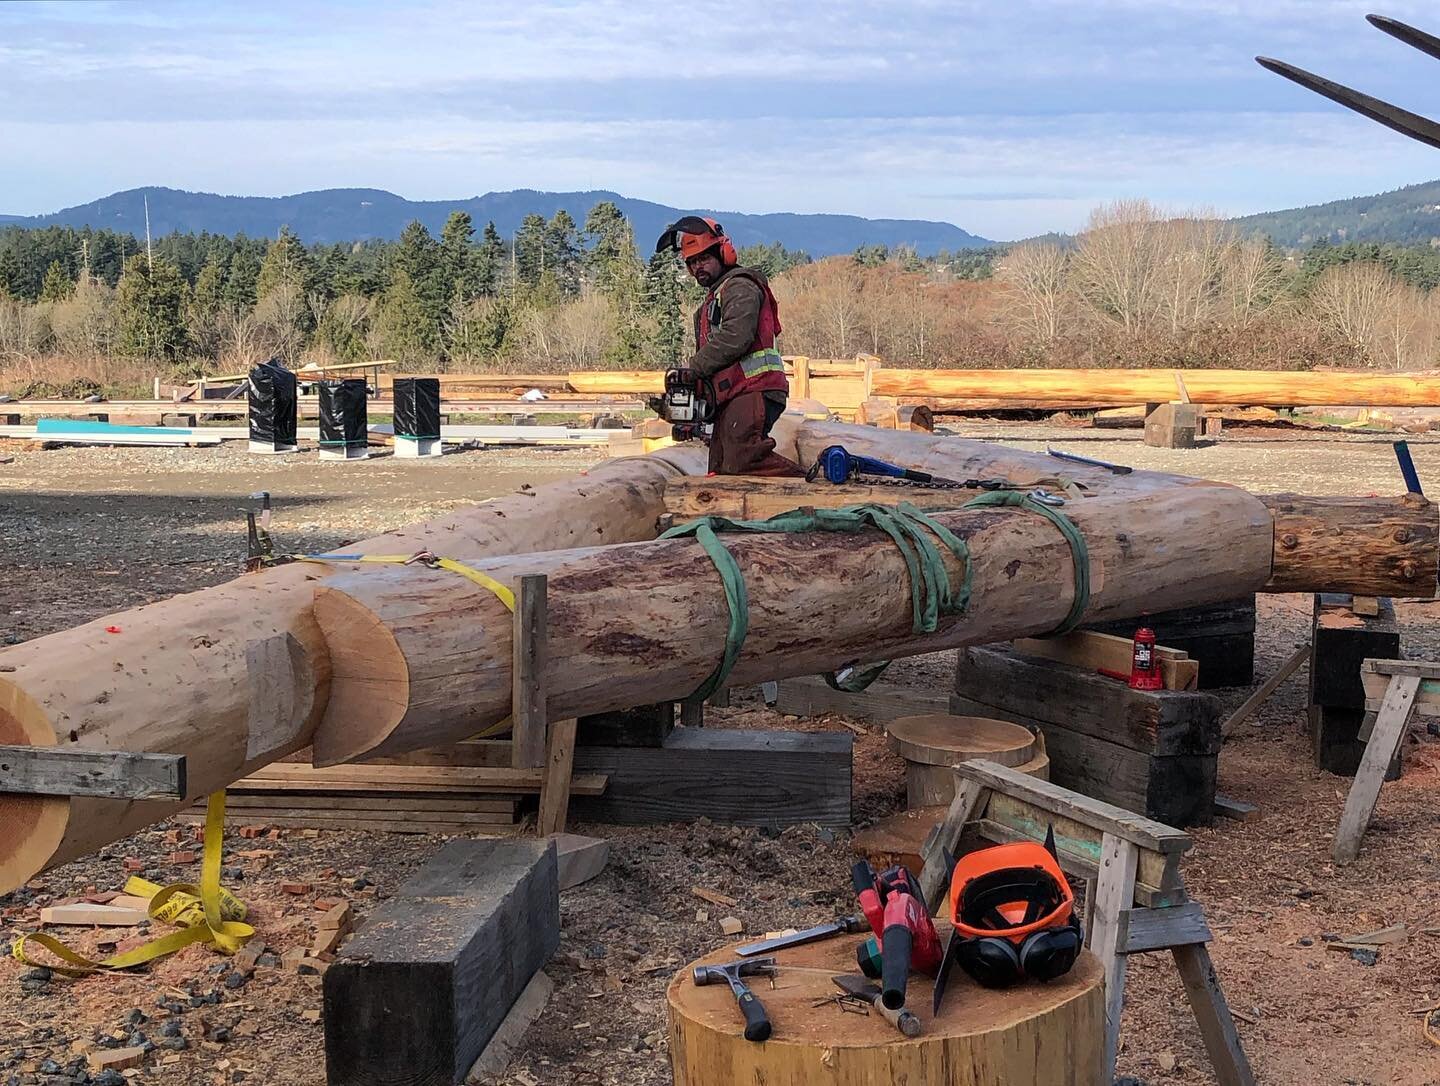 Dry fitting our trusses before we move the separate members to the building location for final assembly. 
.
.
.
.
.
#timberframe#heavytimbers#timberframestructure#roundlog#logbuilding#carpentry#engineering#architecture#timber#postandbeam#cedar#fir#in